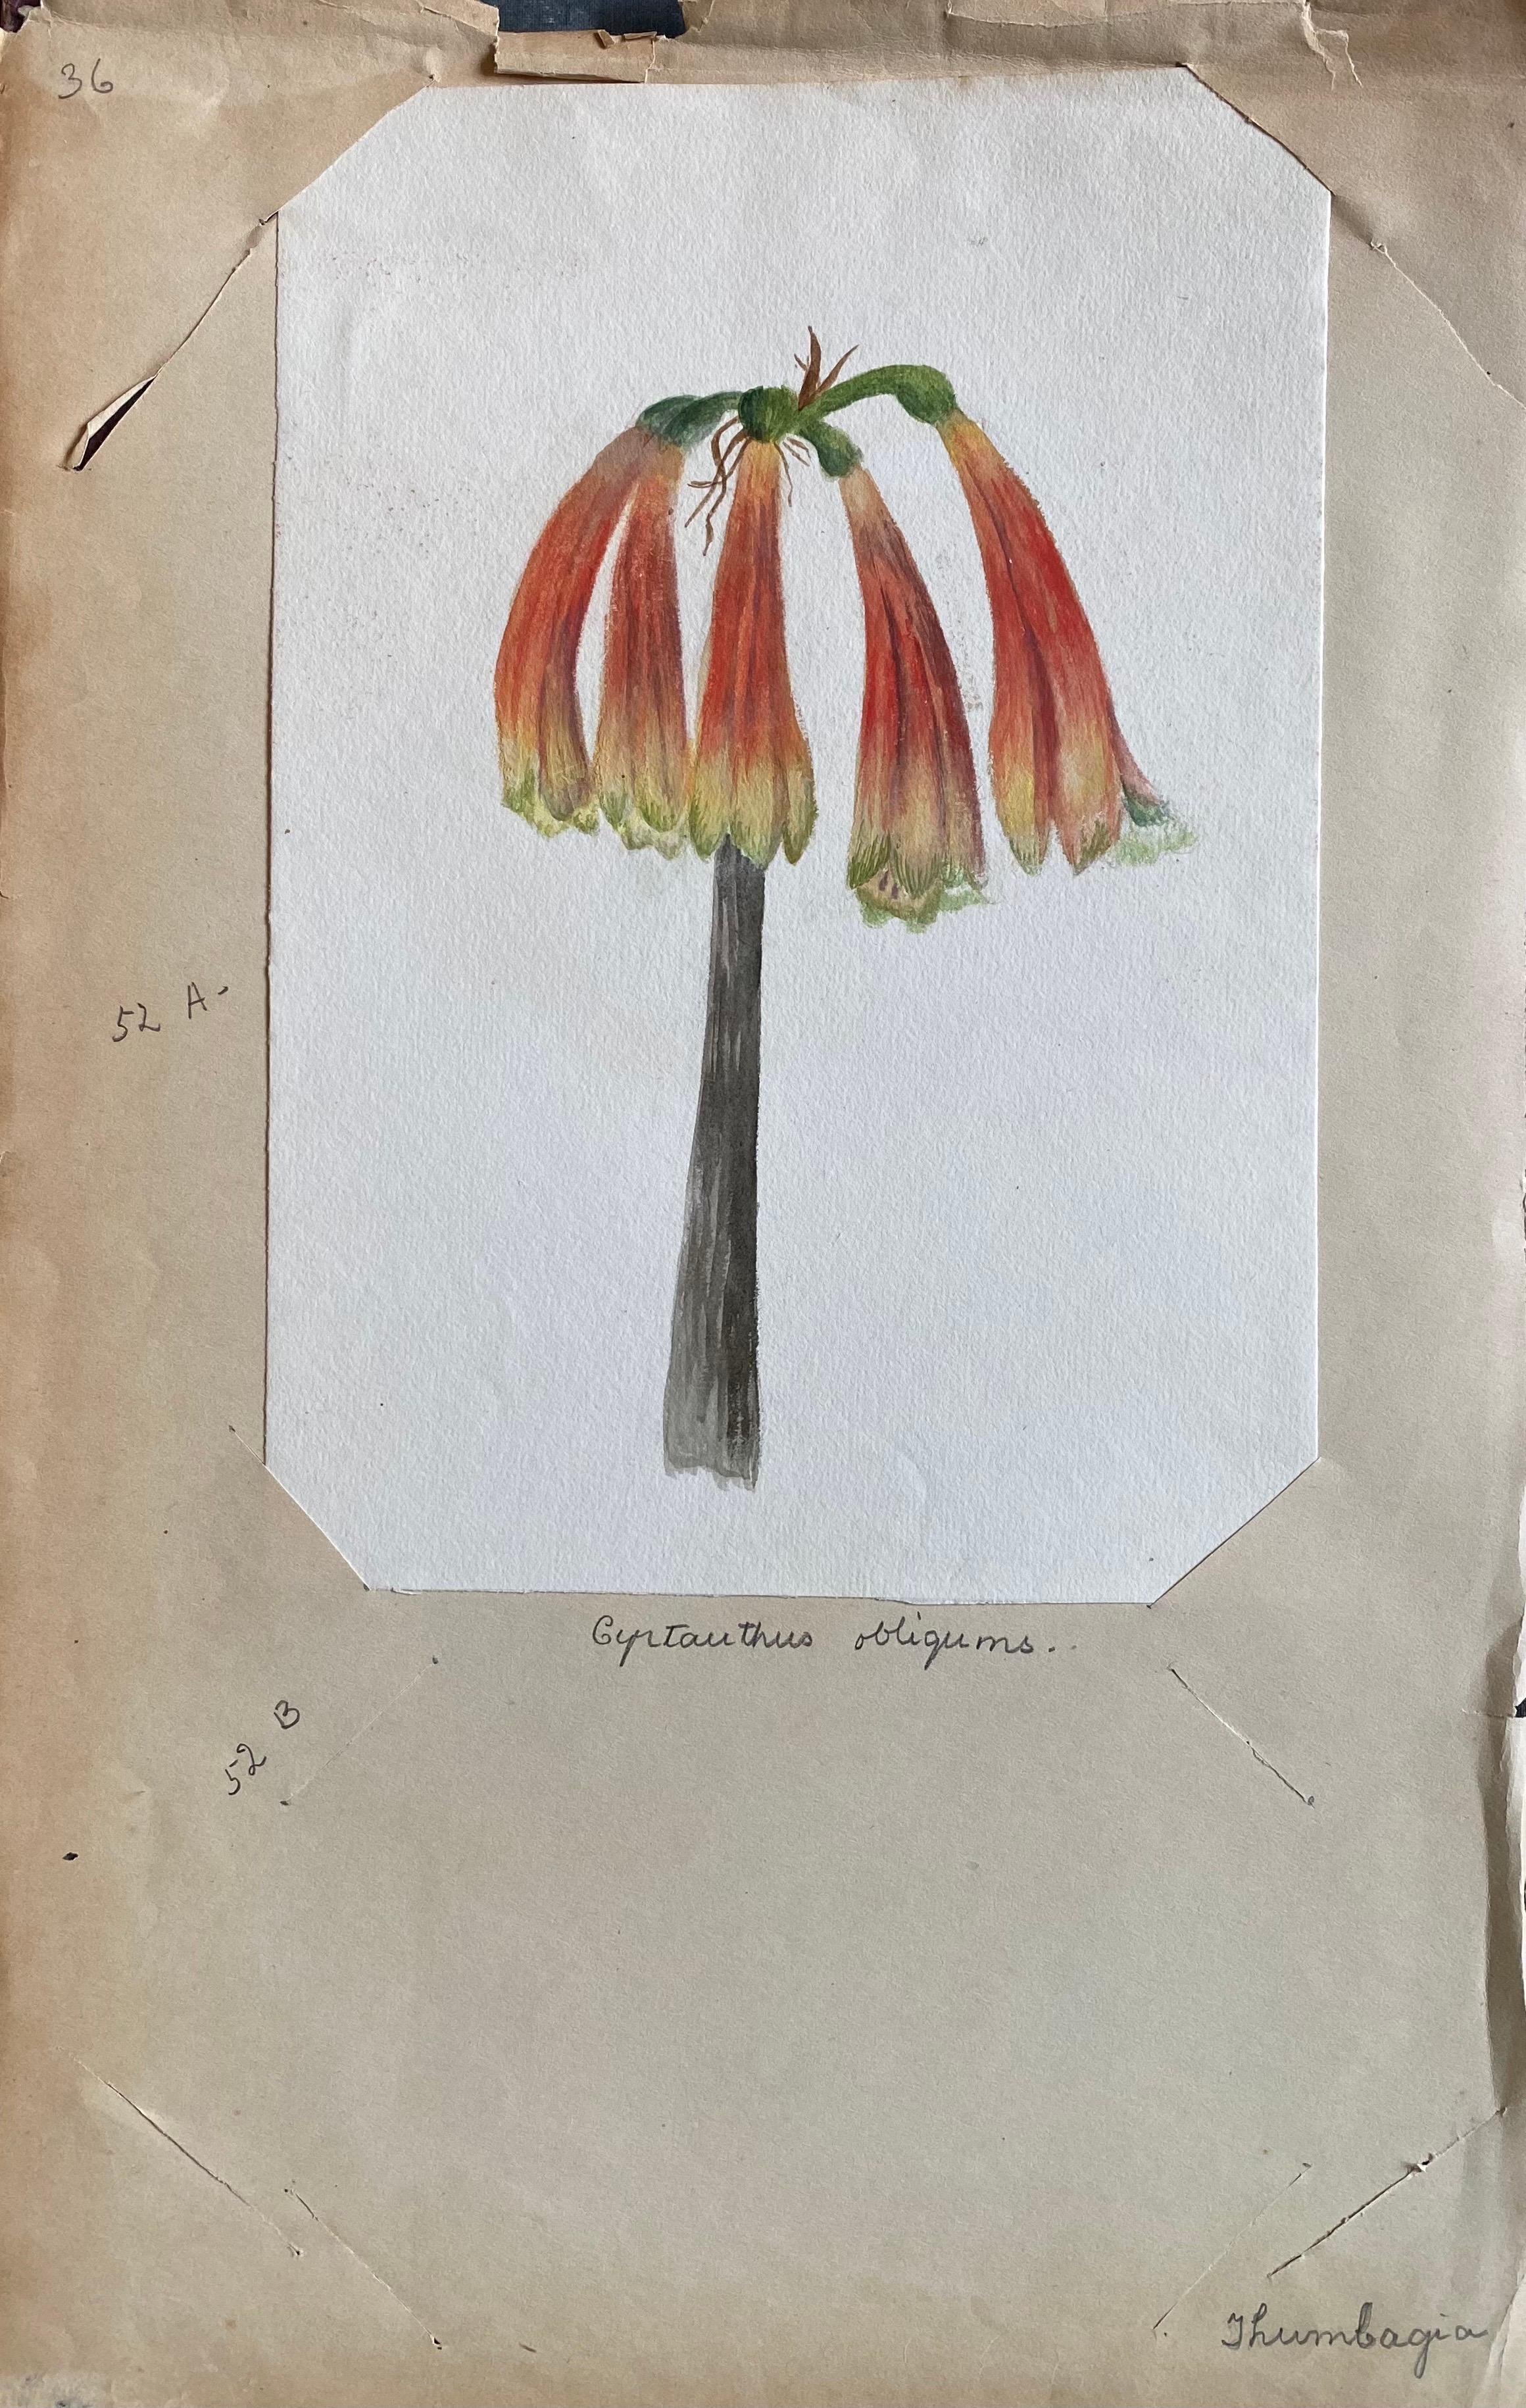 A very fine original antique English botanical watercolor painting depicting this beautiful depiction of a flower/ plant. The work came to us from a private collection in Surrey, England and had been part of an album of works assembled by the artist